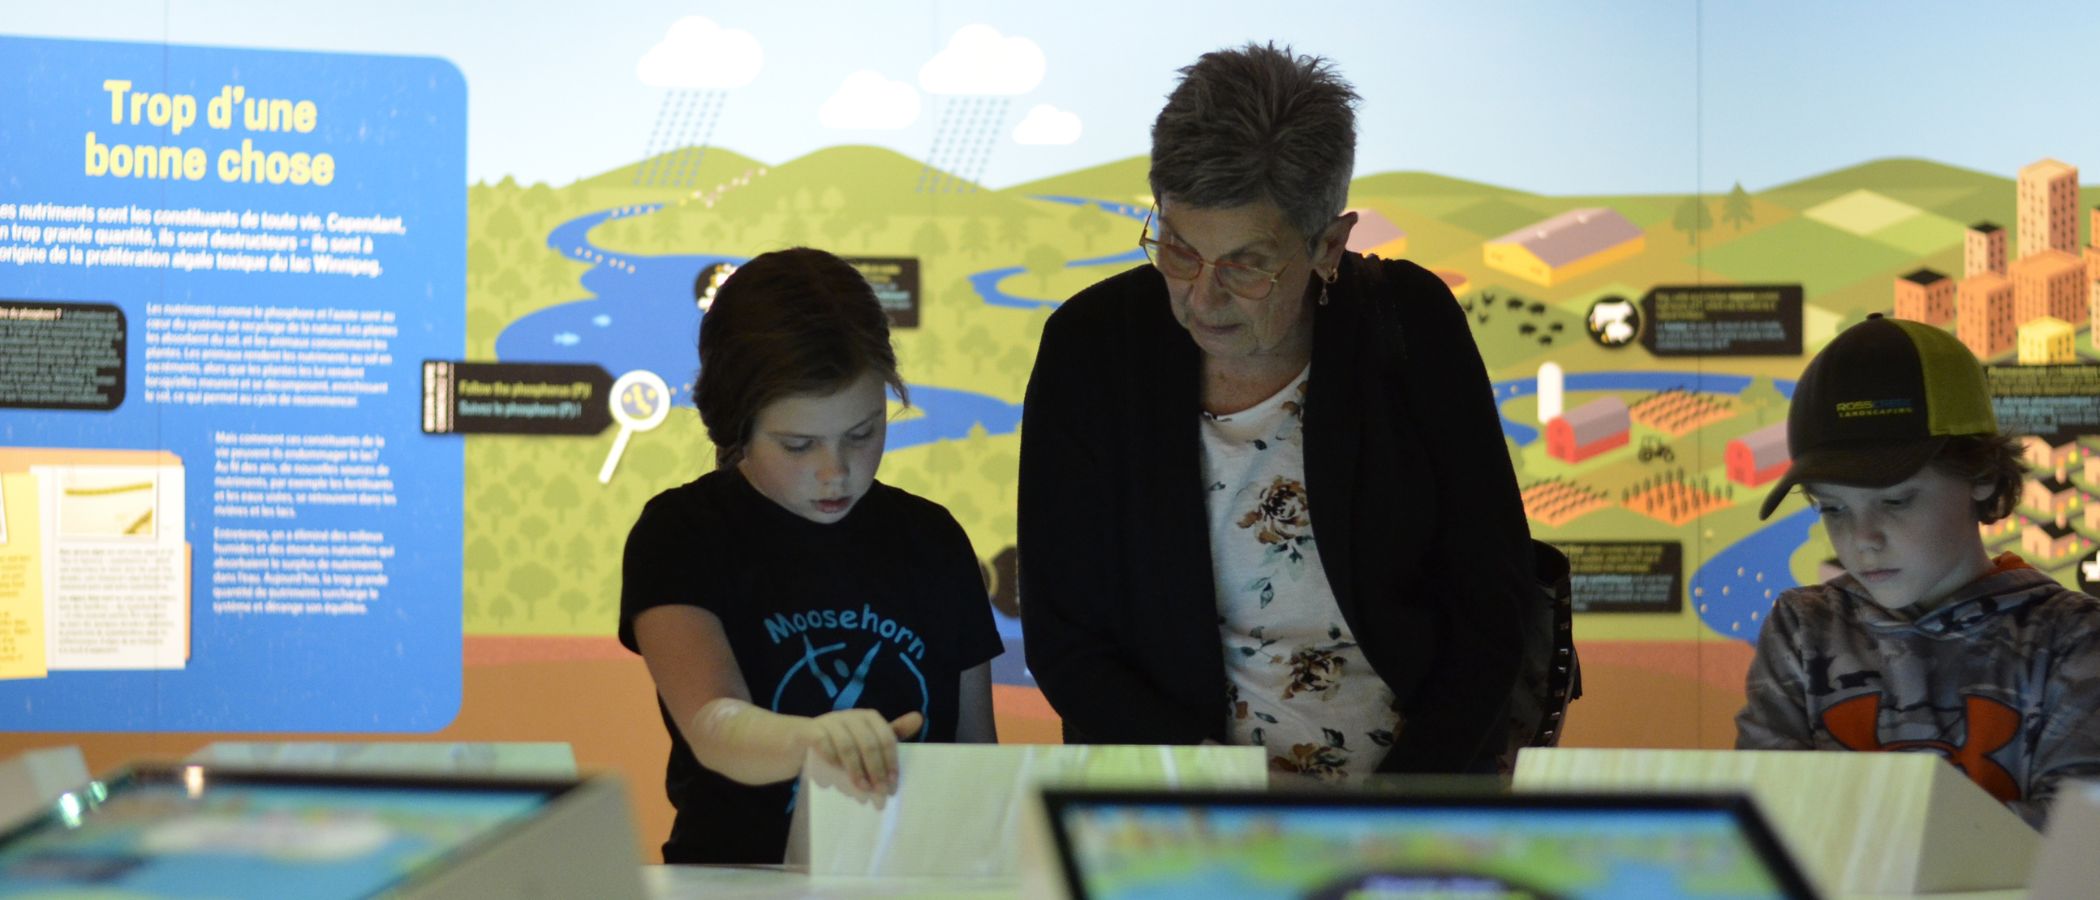 An adult and two children interact with digital displays and projection that show the changing environment of Lake Winnipeg.